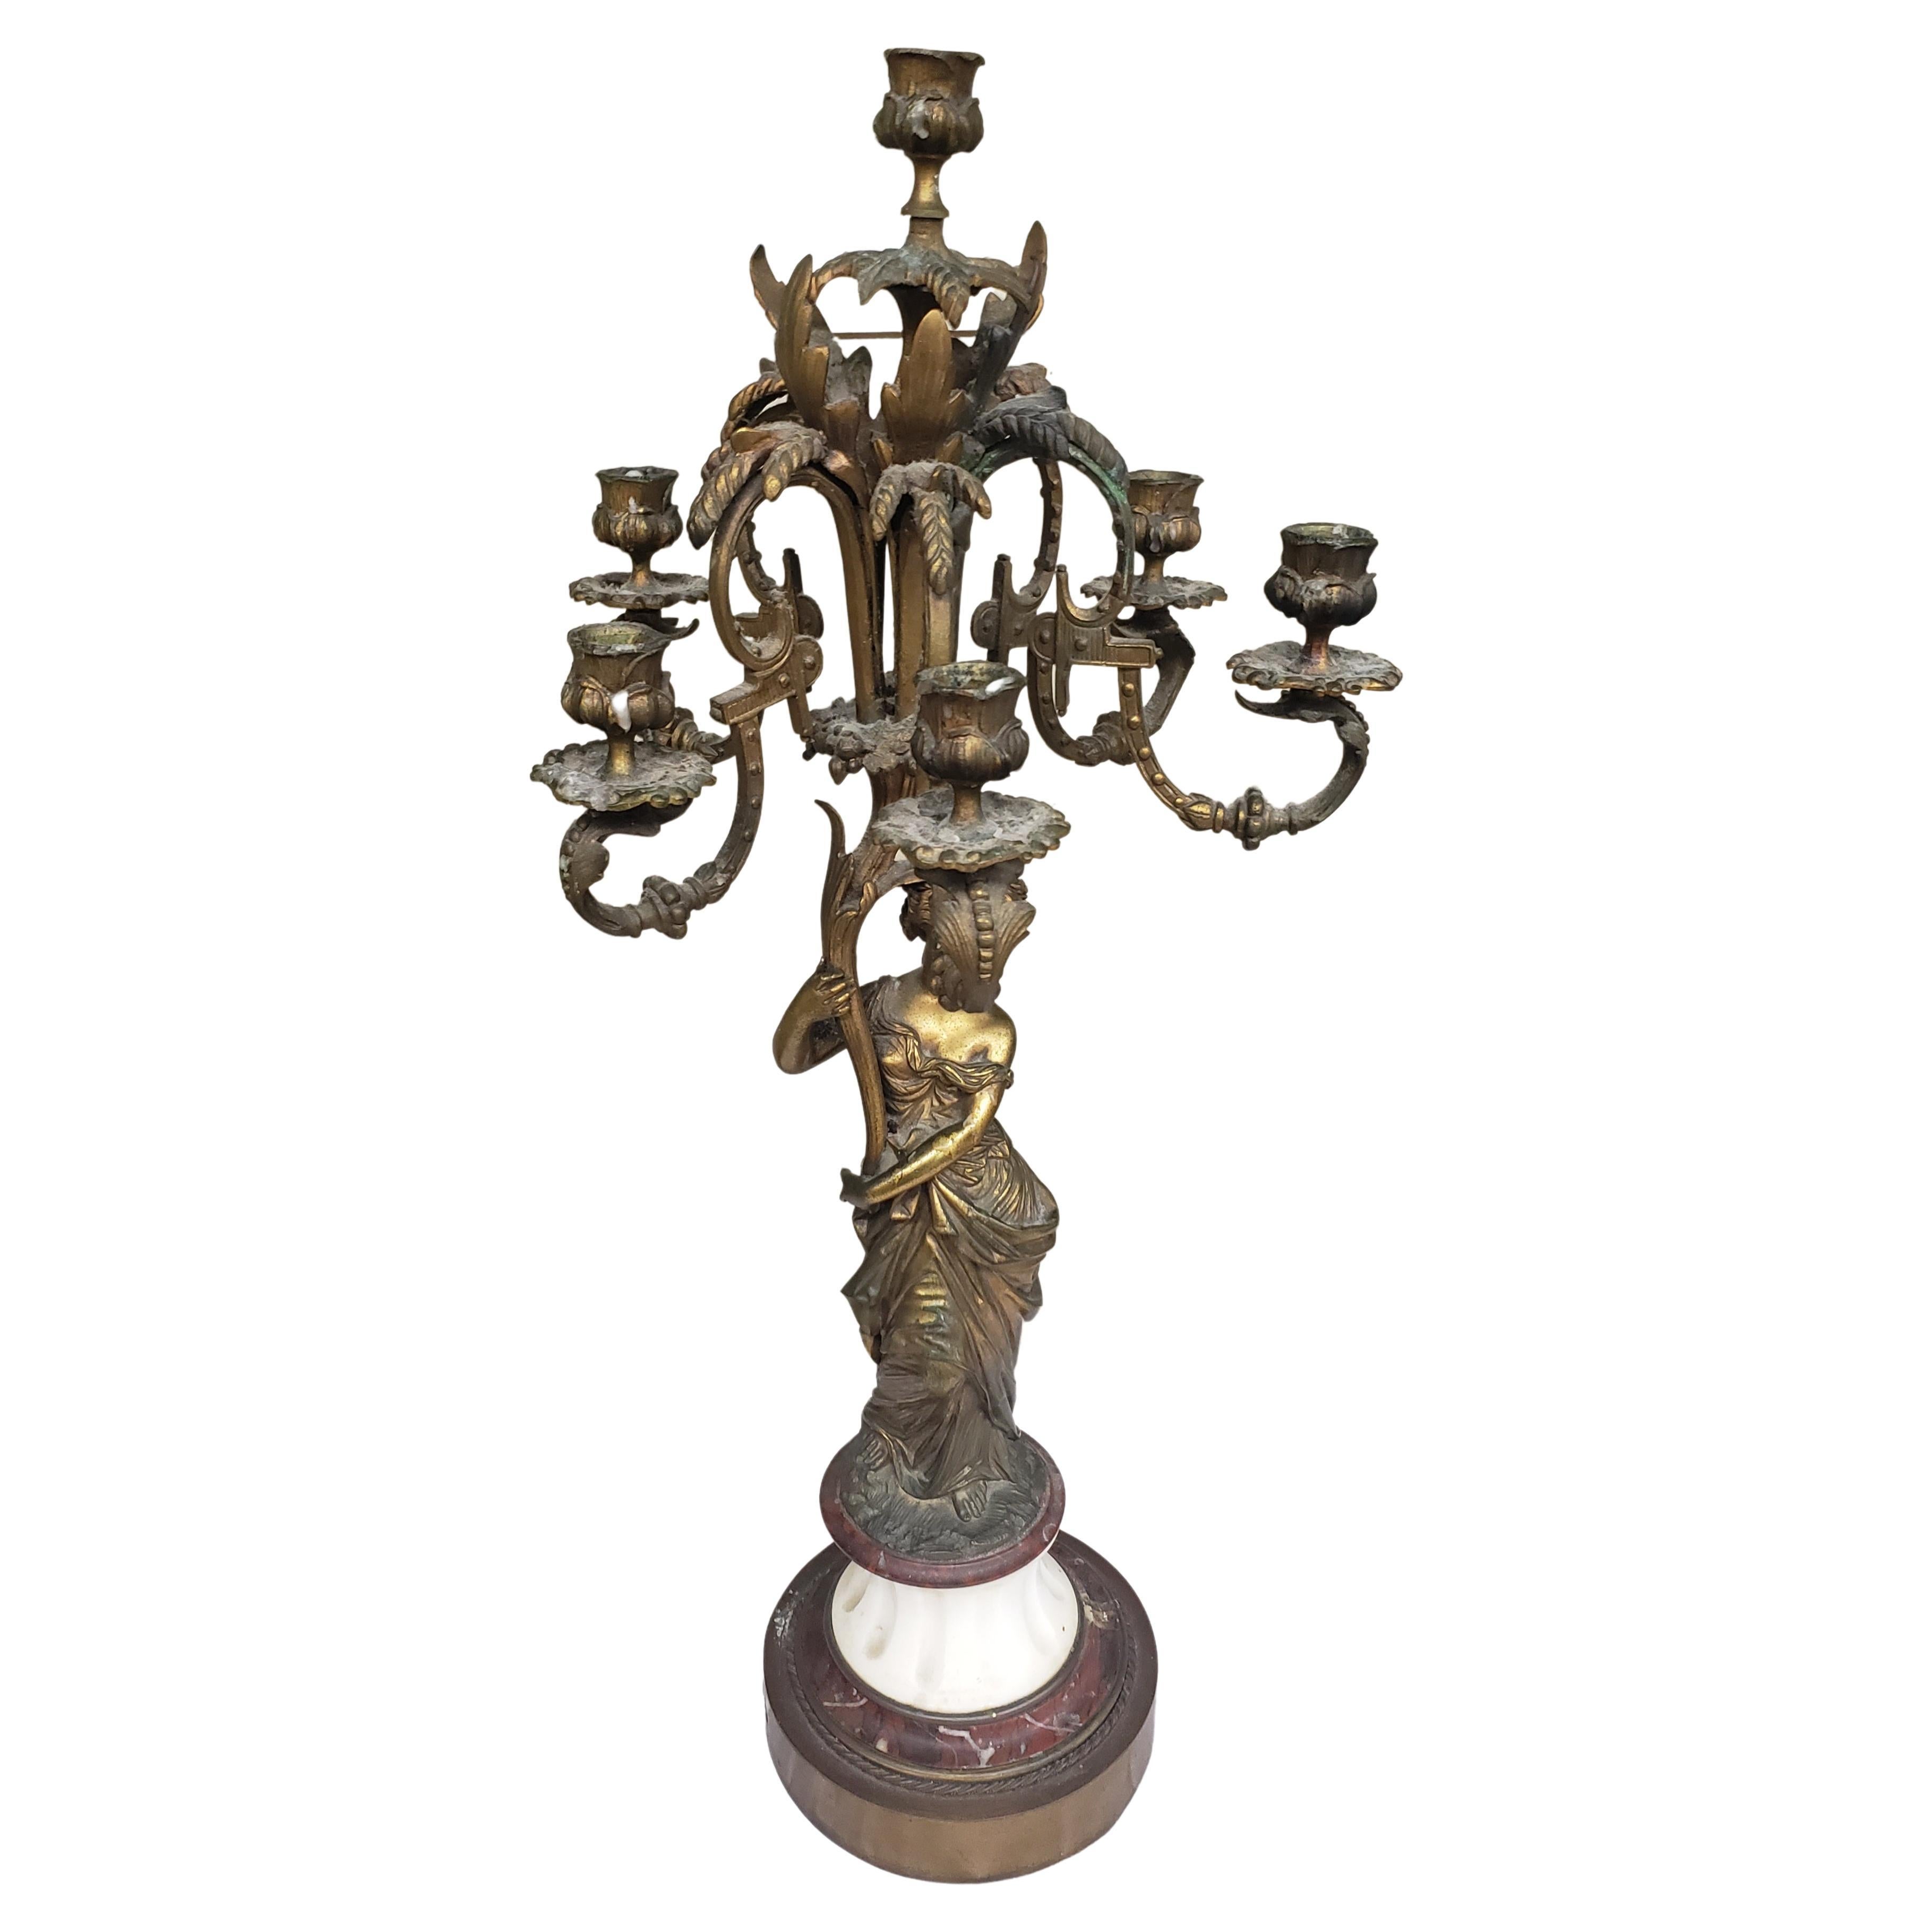 A 18th Century Louis-Philippe Bronze Ormolu With White and Mottled Rouge Marble six-light Figural Candelabrum in clean antique condition. It stands 27'5